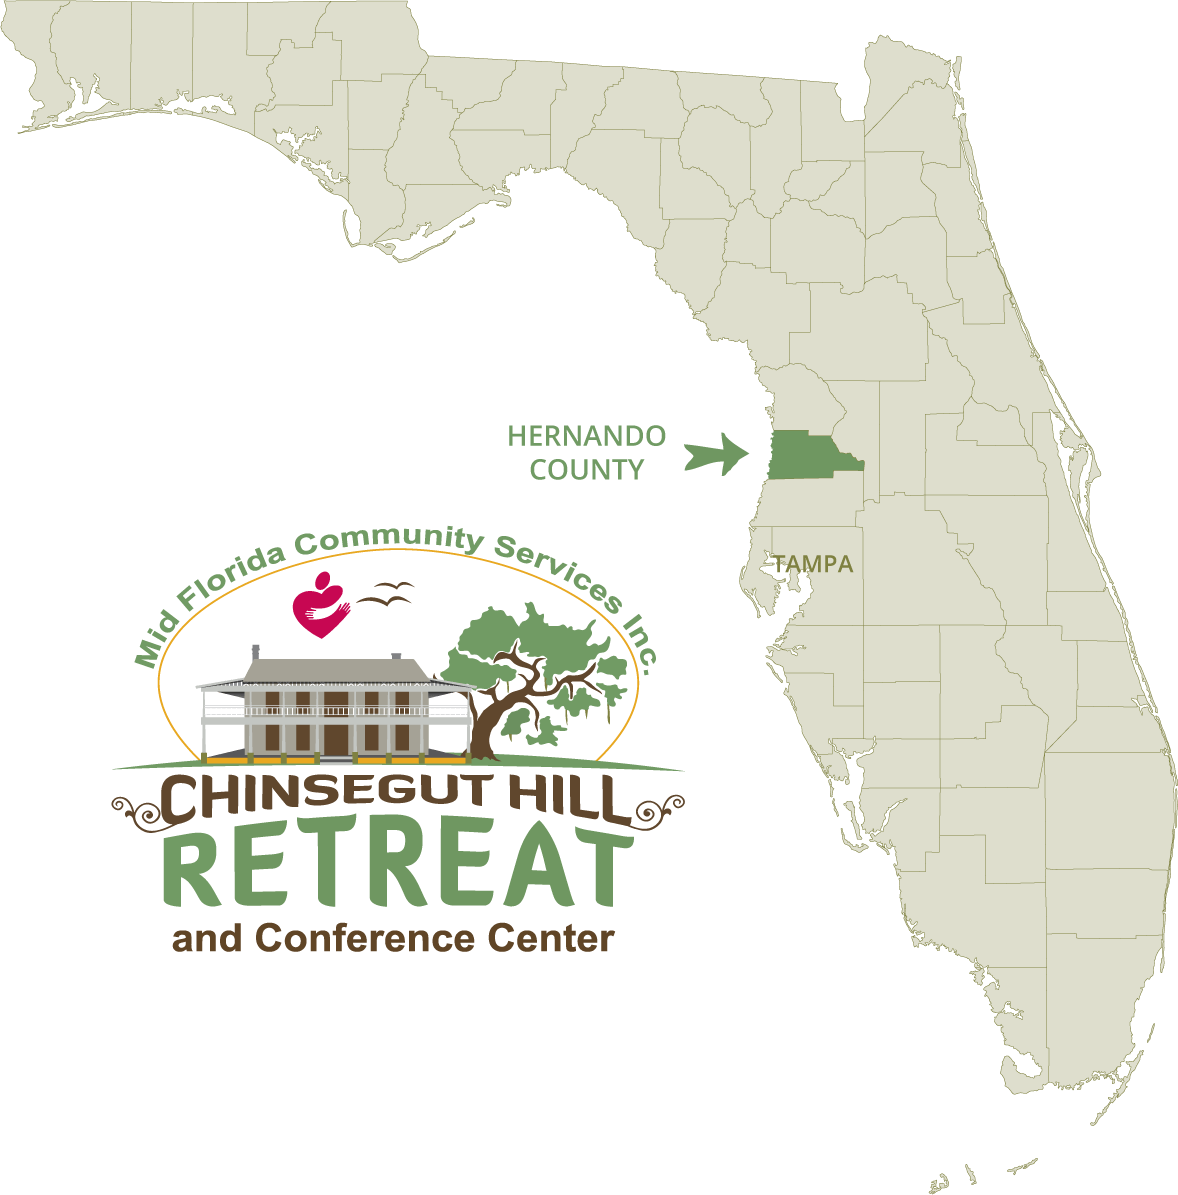 About Hernando County Chinsegut Hill Retreat